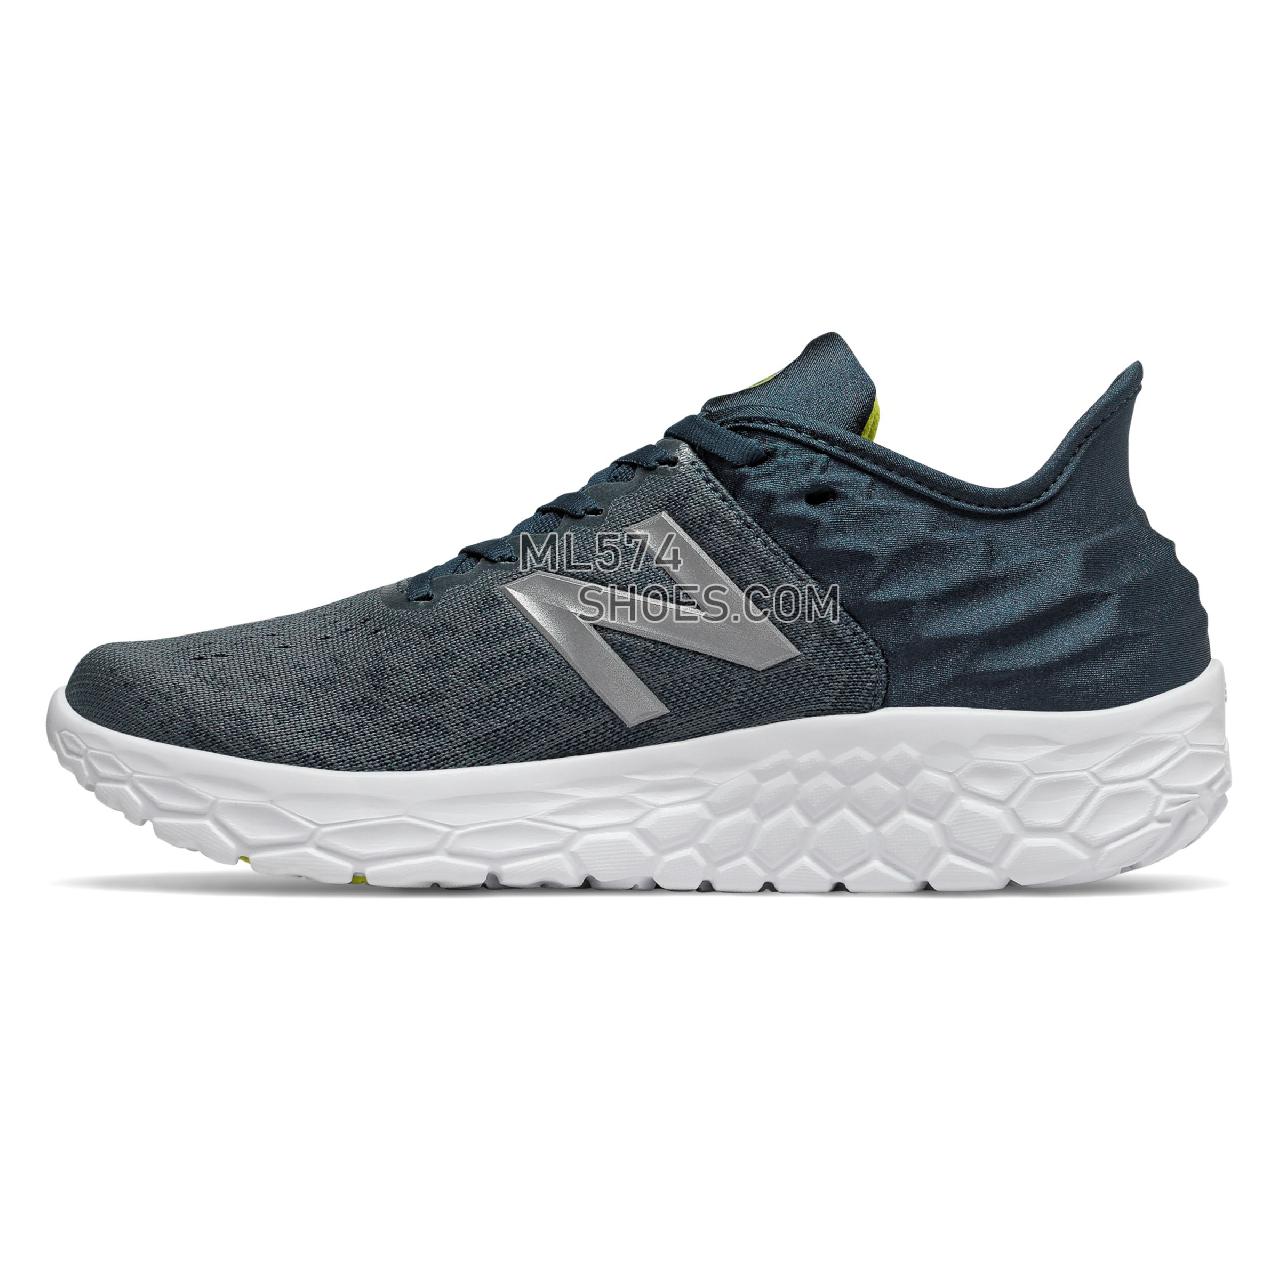 New Balance Fresh Foam Beacon v2 - Men's Neutral Running - Orion Blue with Supercell and Sulphur Yellow - MBECNFG2